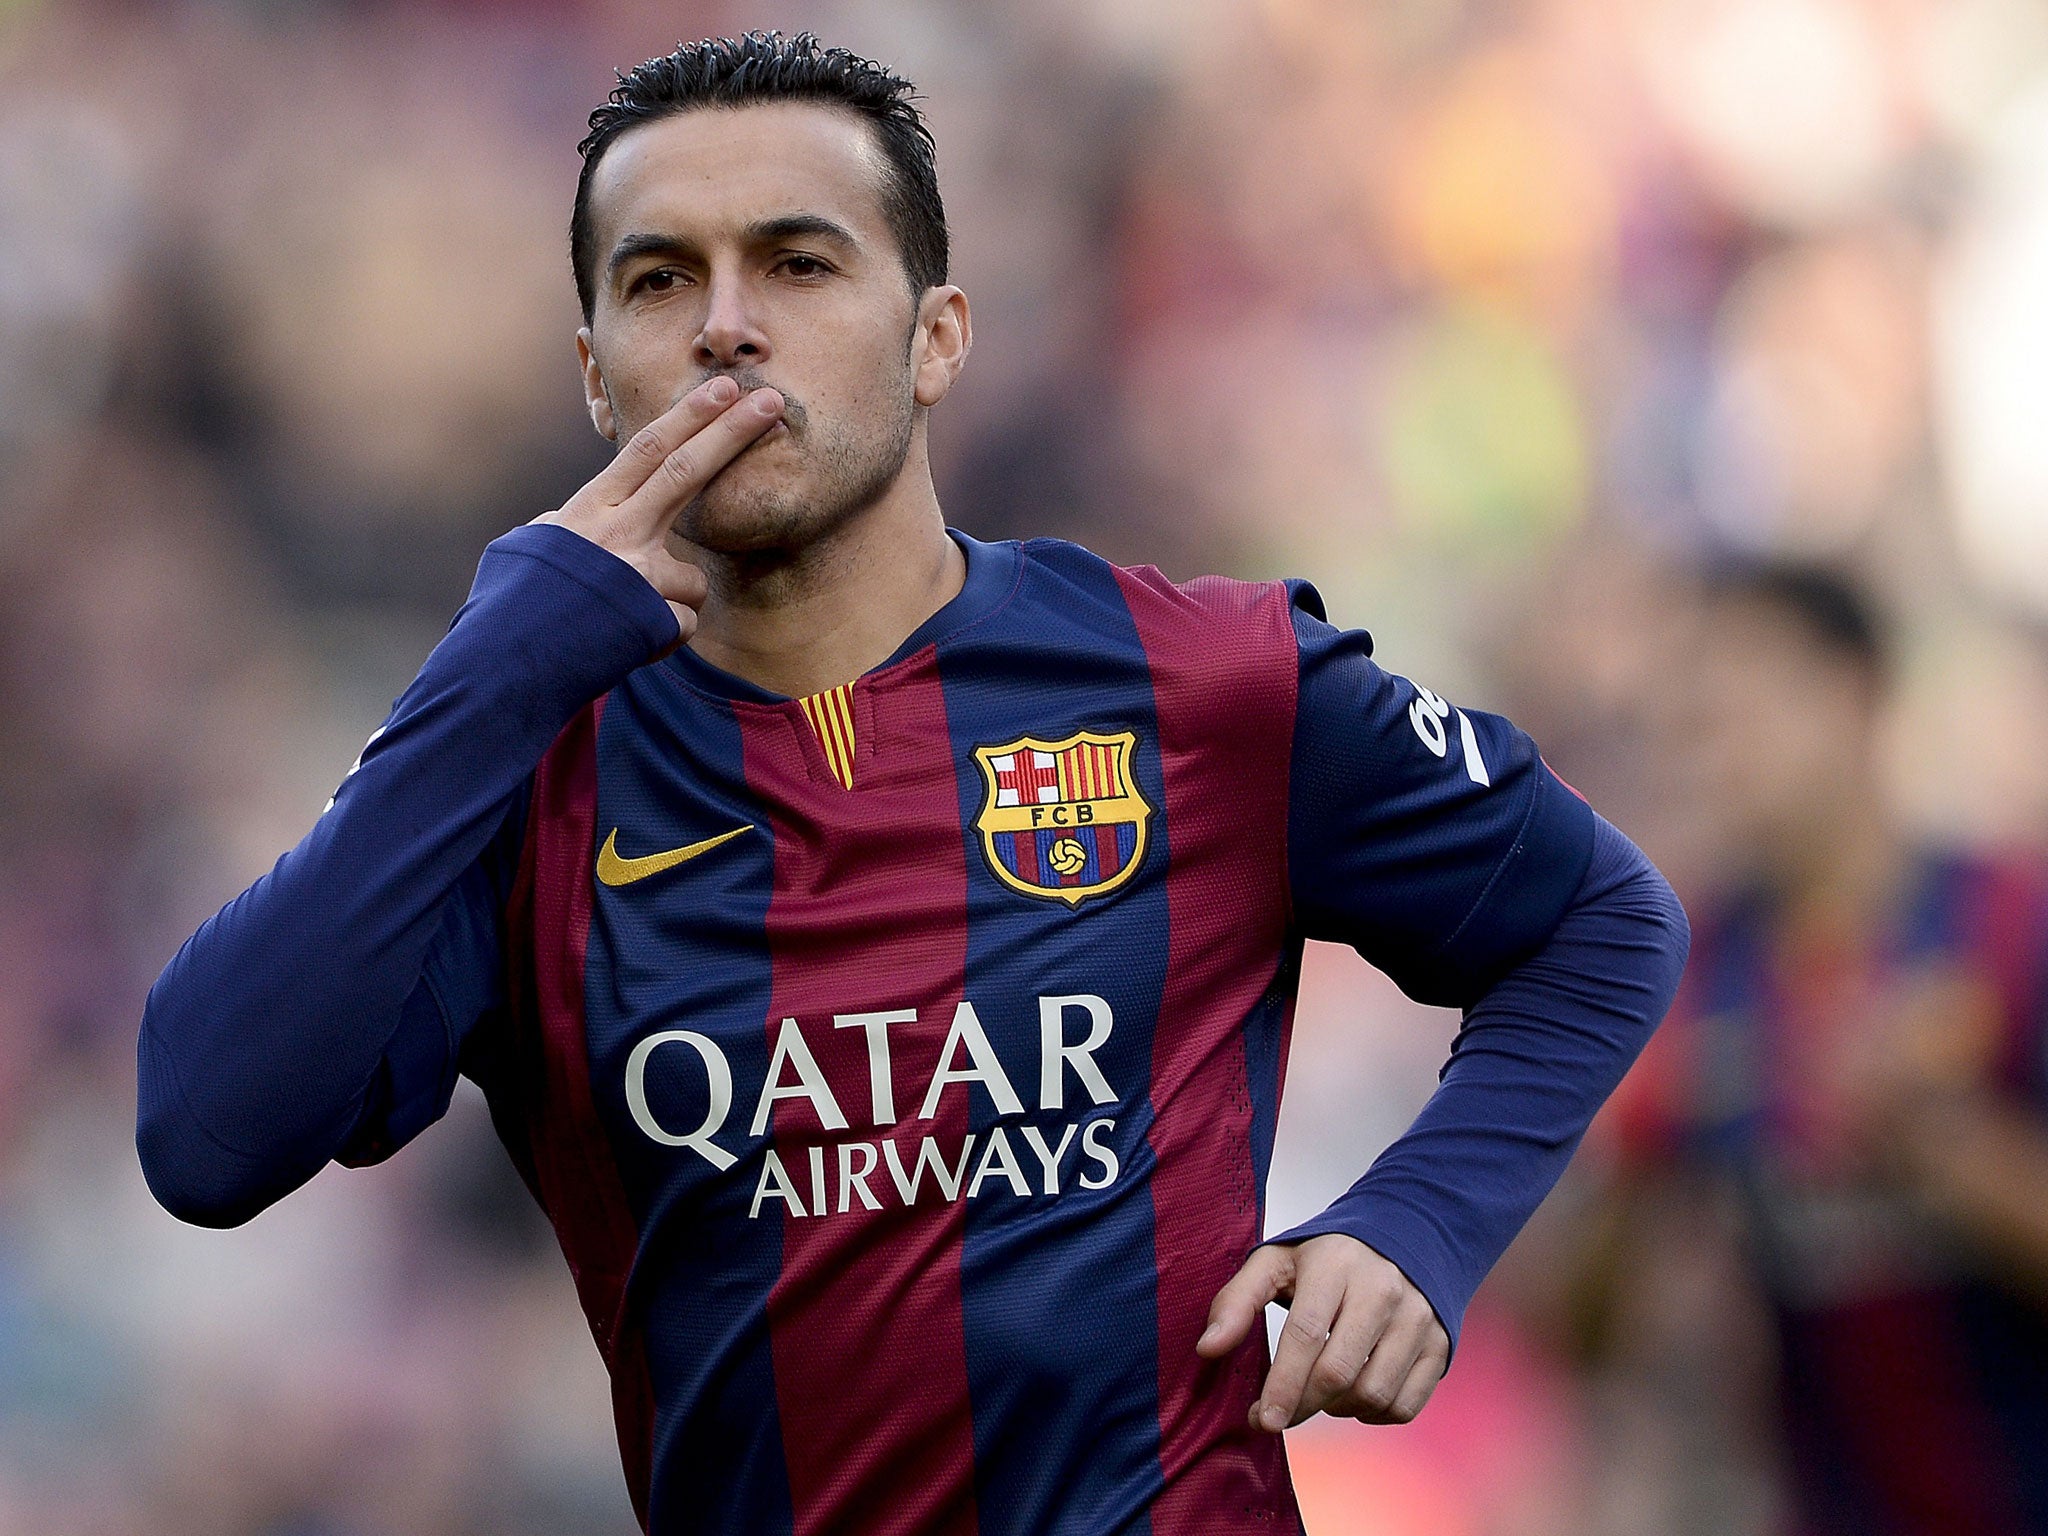 Pedro has been strongly linked with a switch to Old Trafford